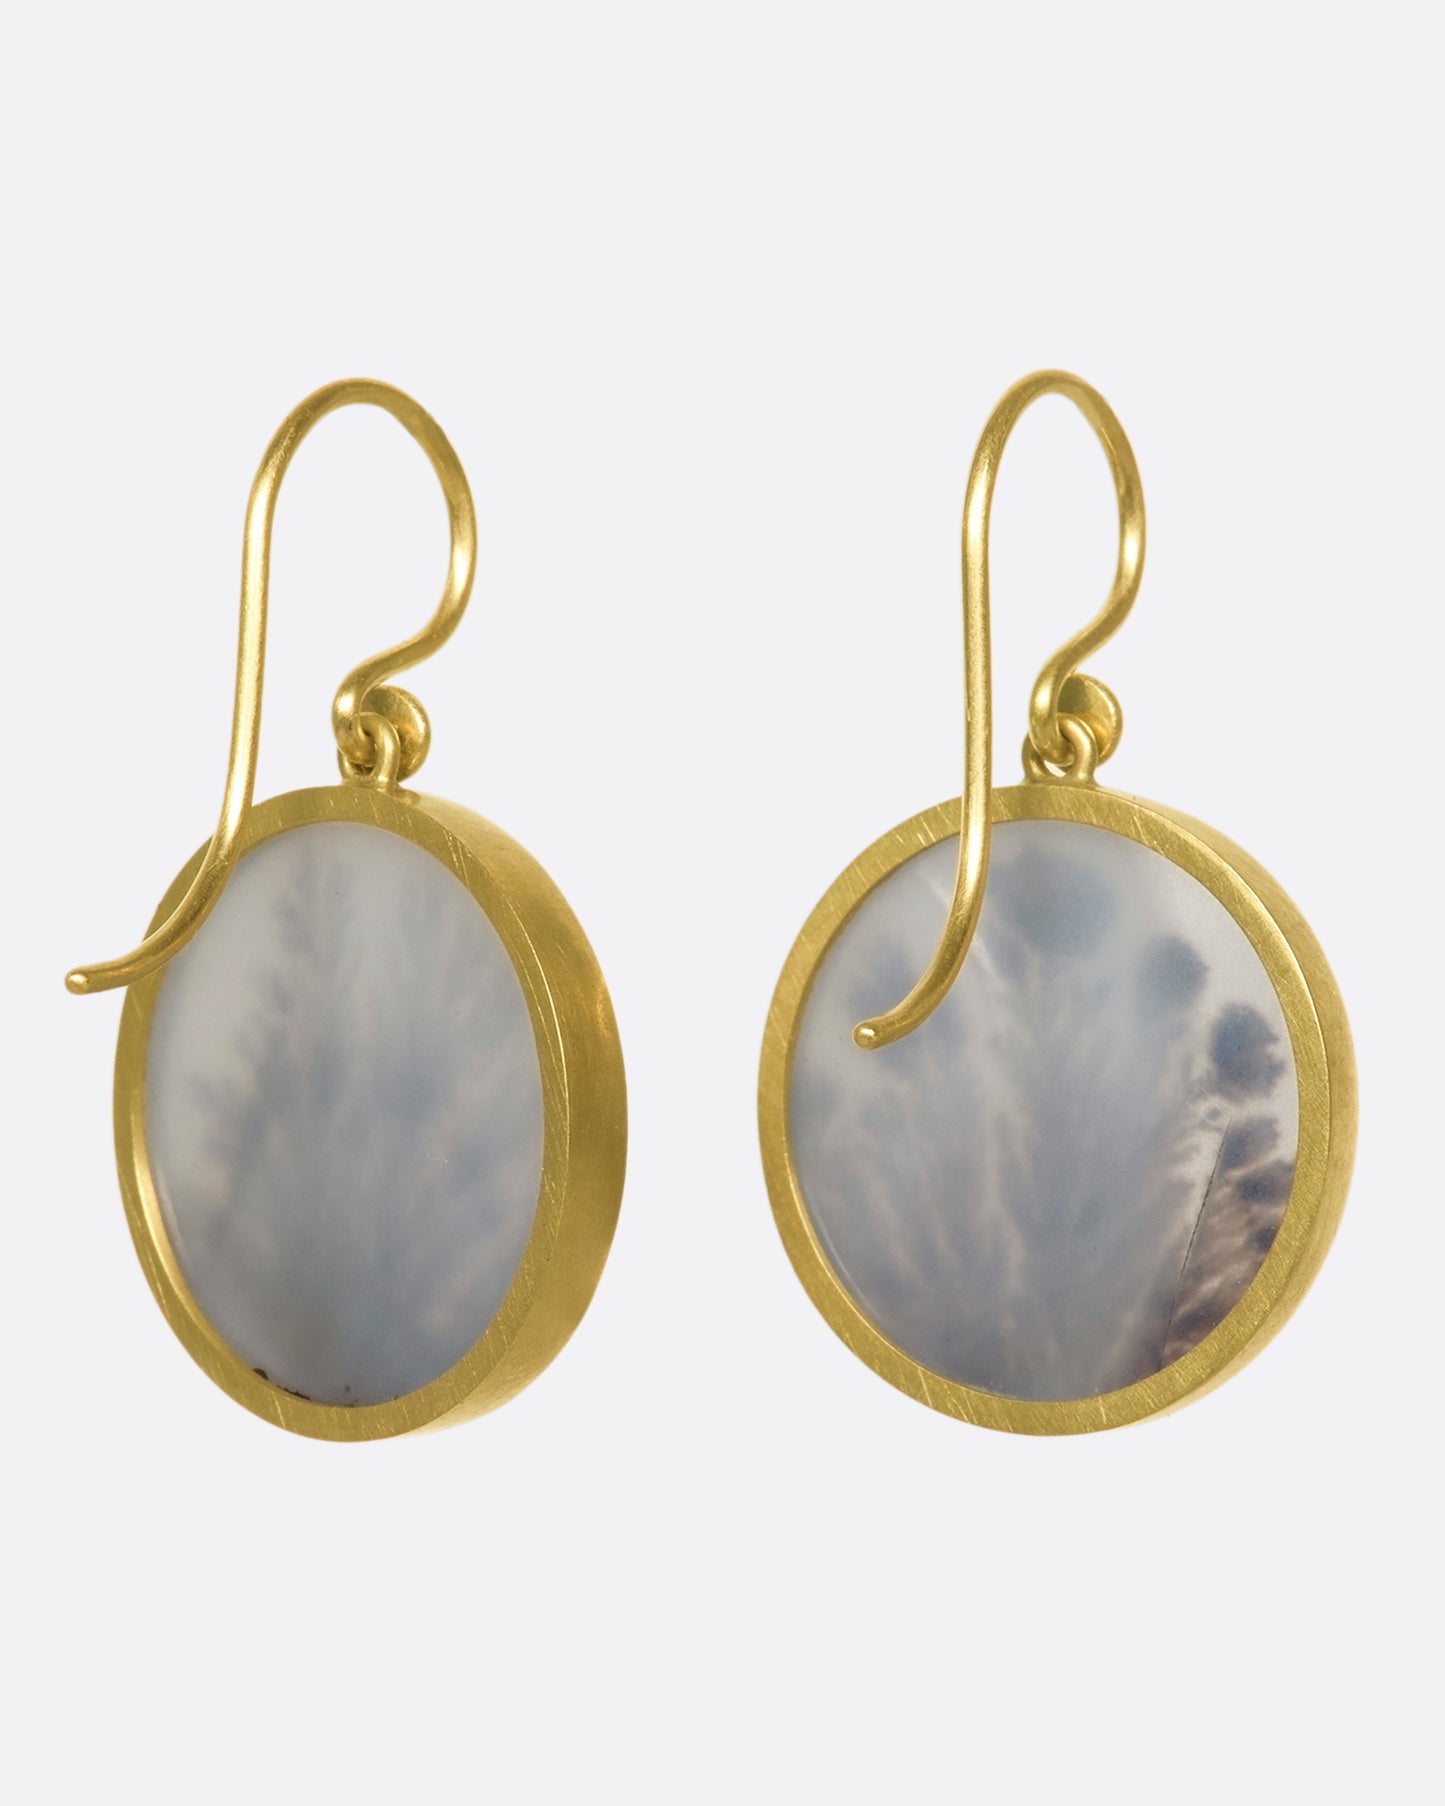 The back of a pair of yellow gold, bezel set, round dendritic agate earrings